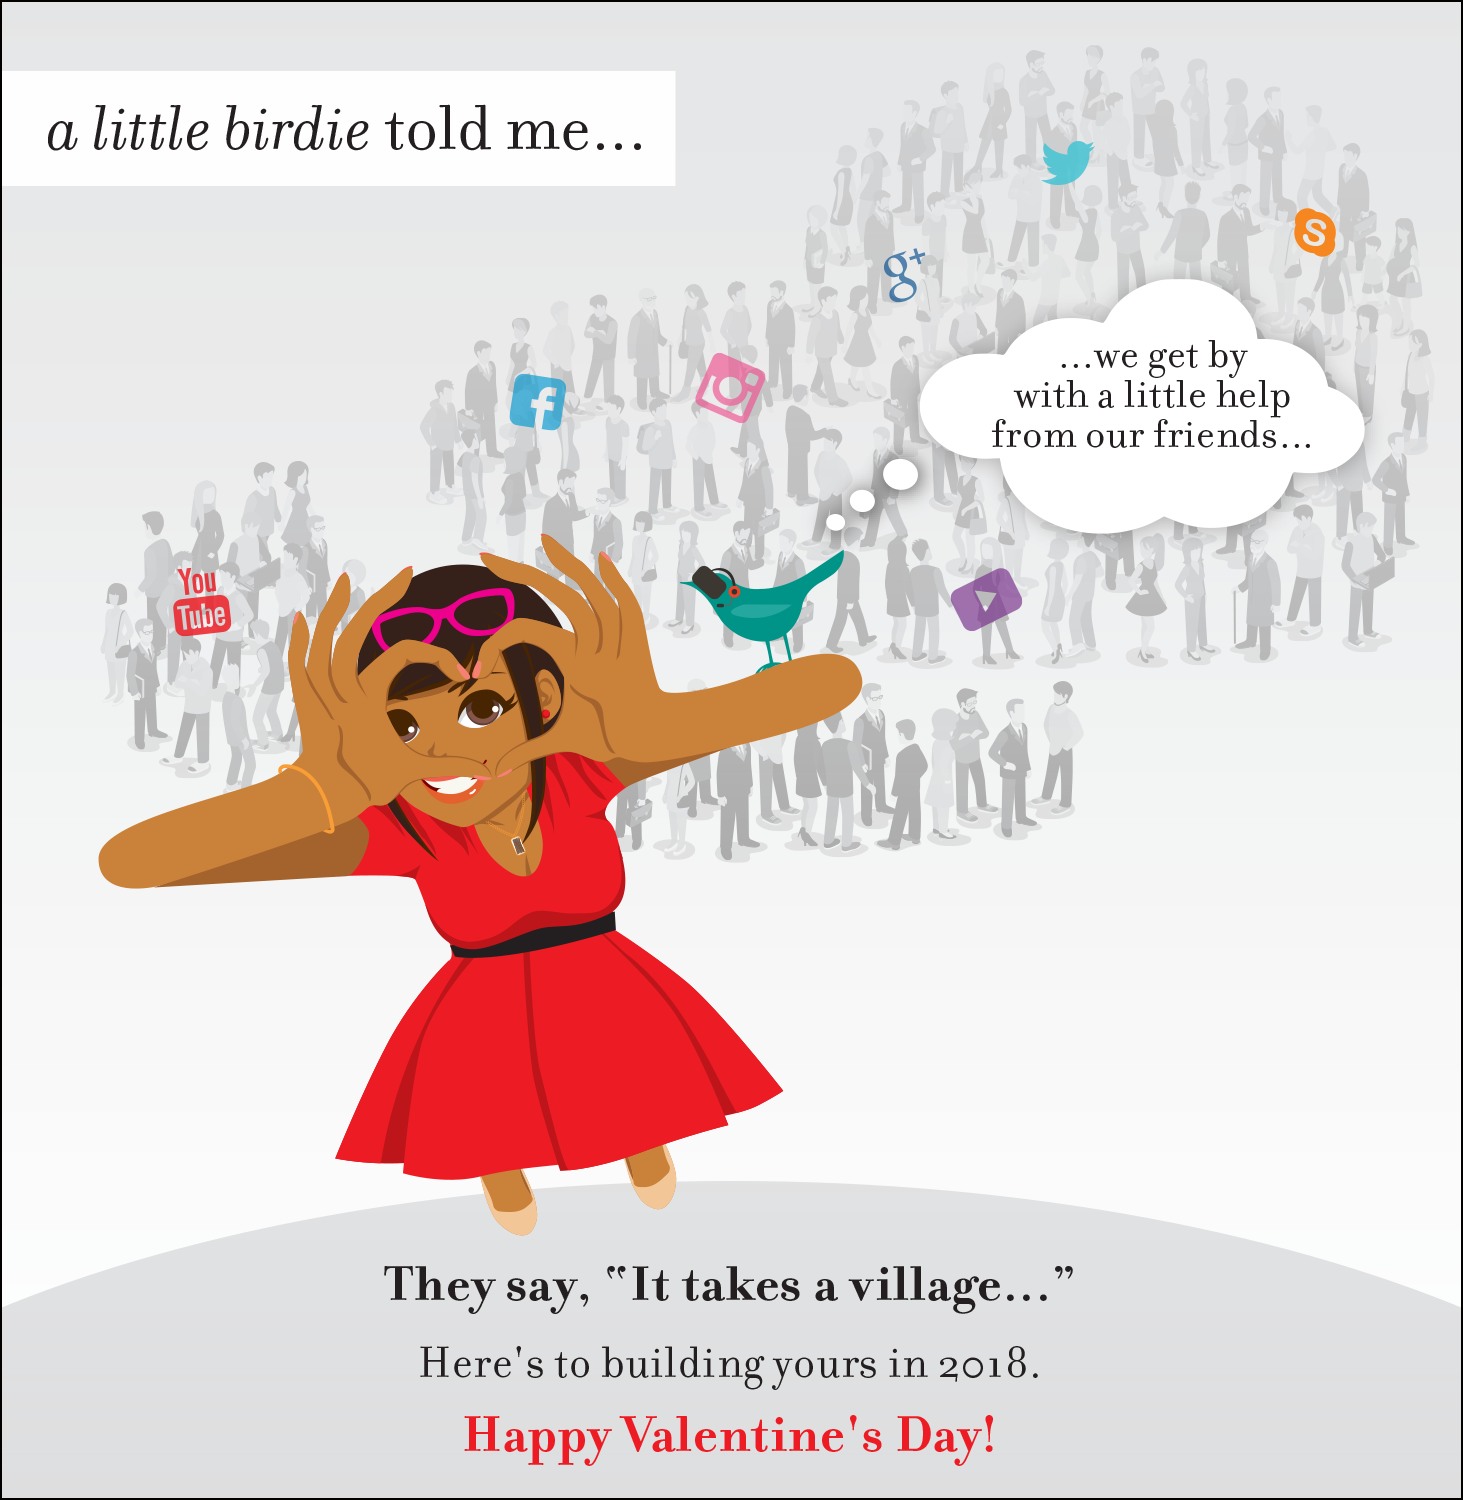 Valentine's Day e-card from Shonali and the Birdie